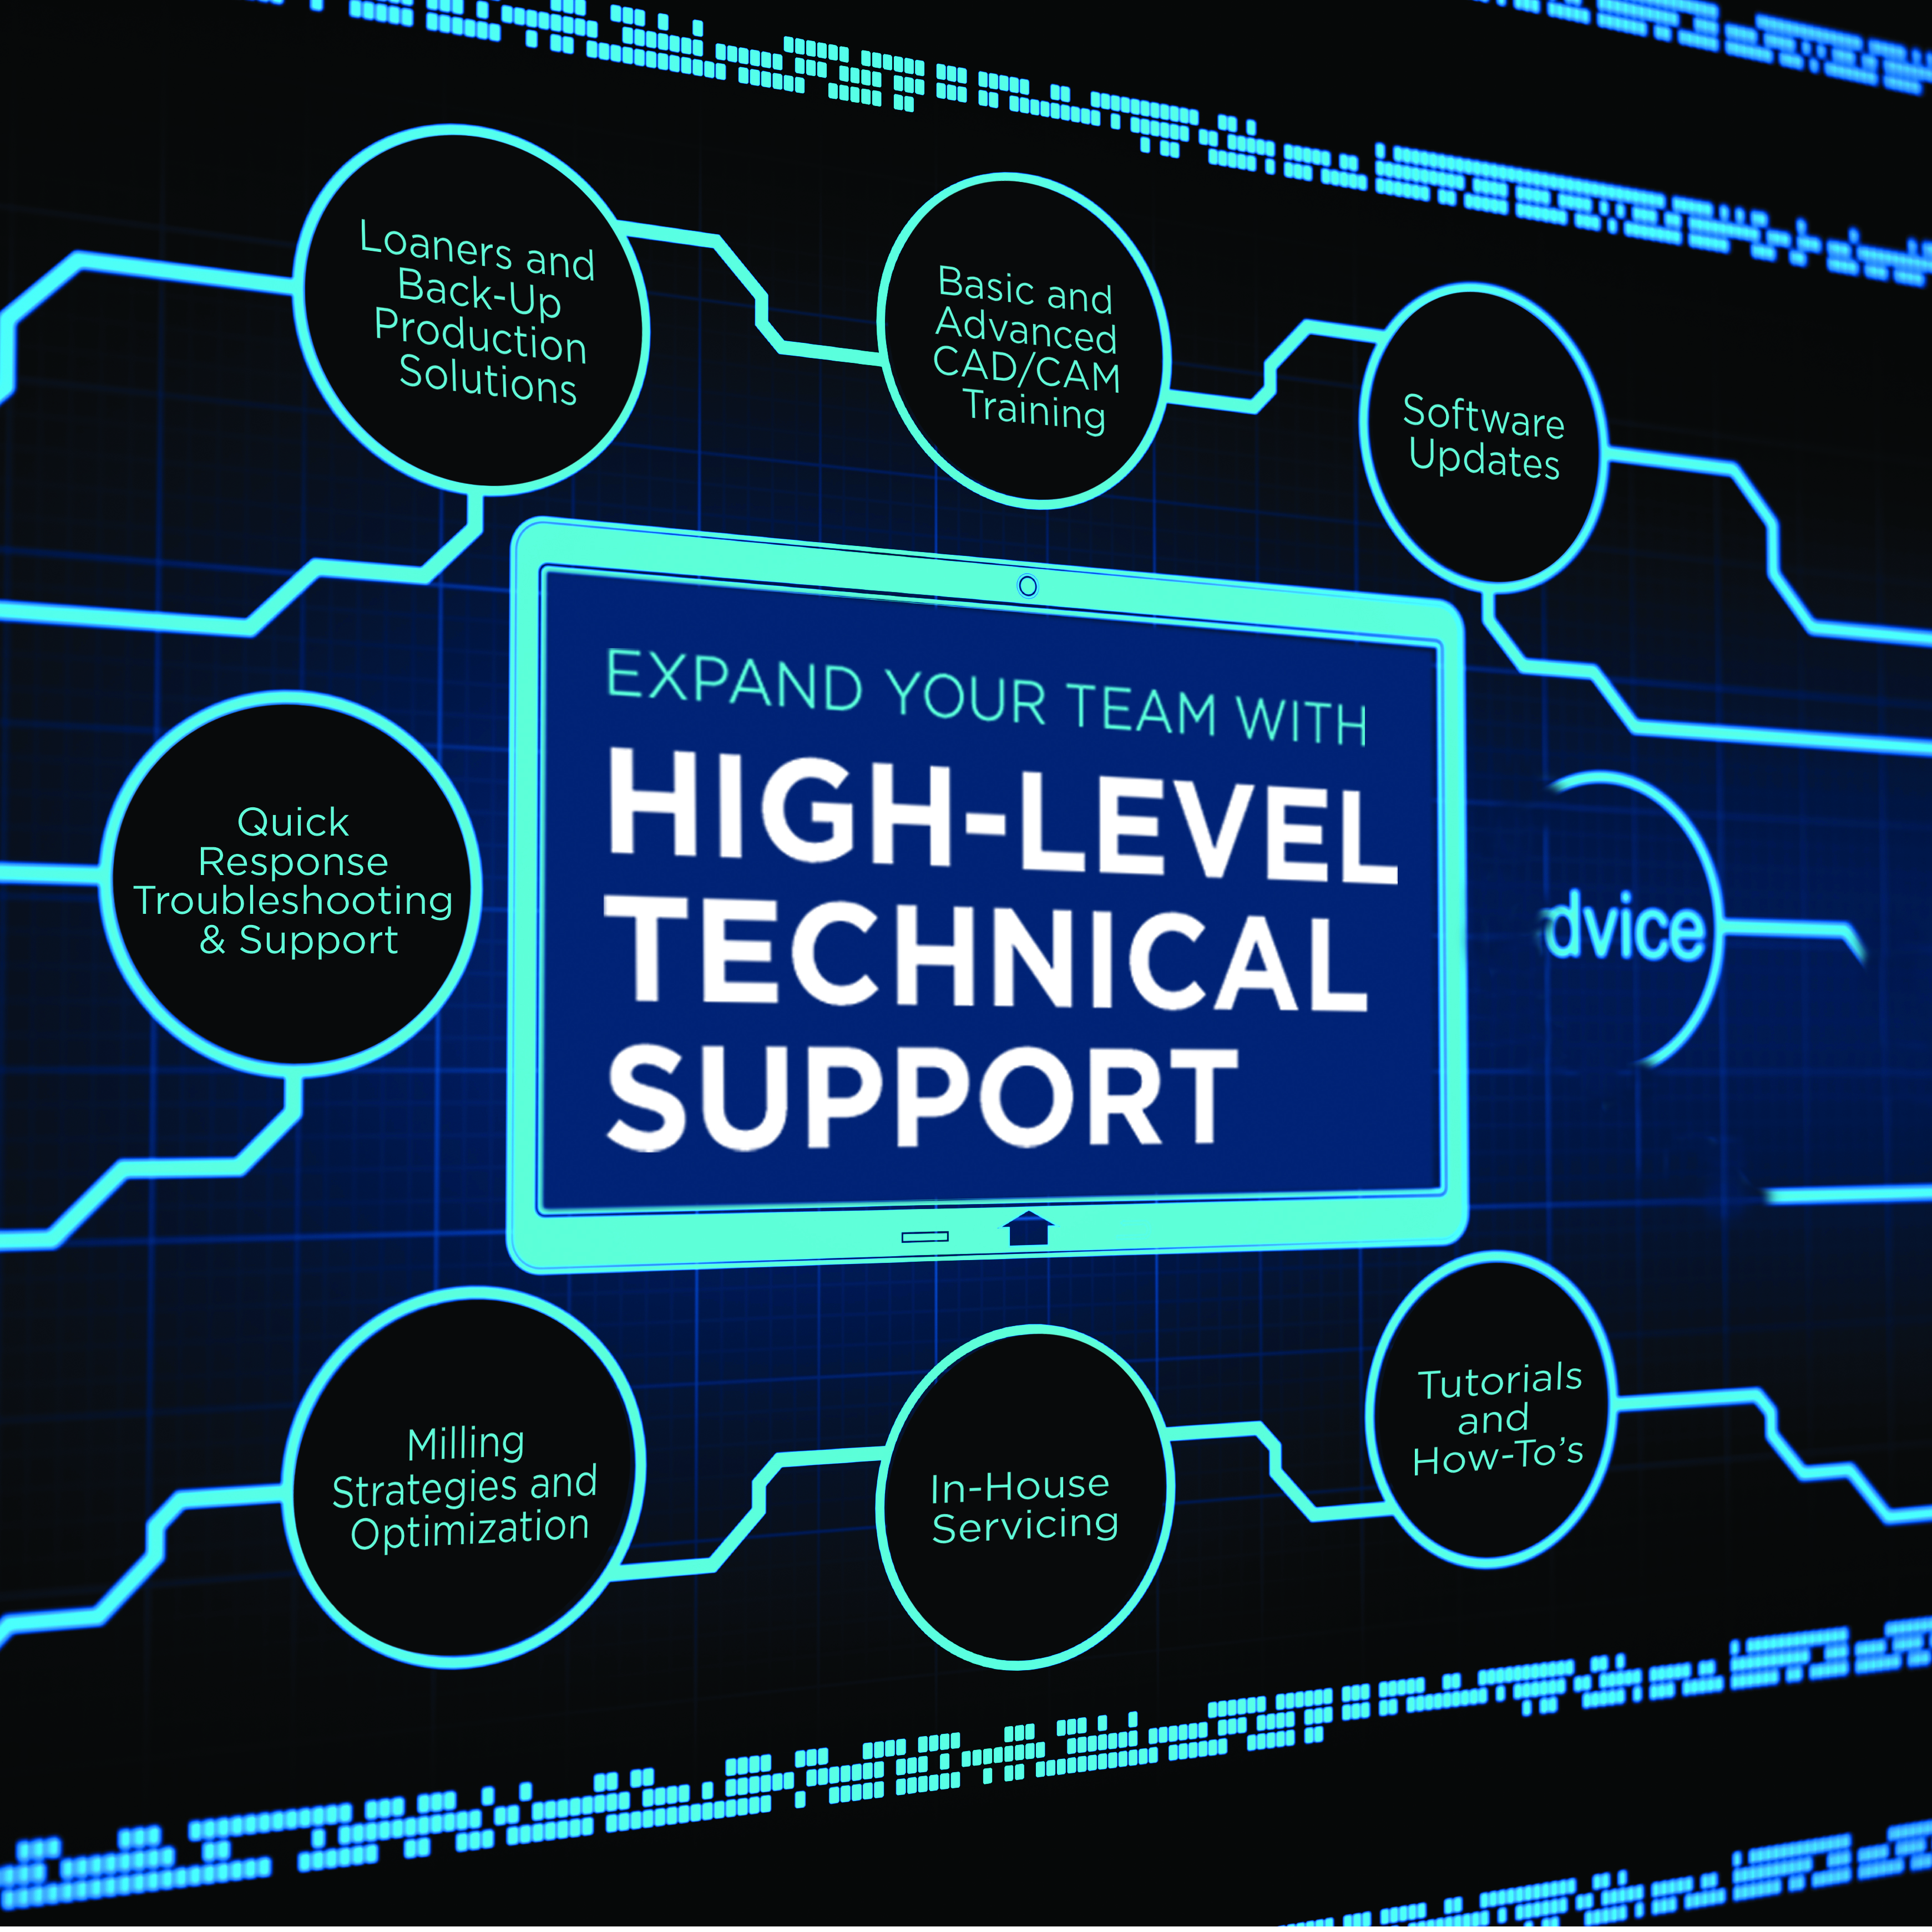 Expand Your Team with High-Level Technical Support Ebook Library Image